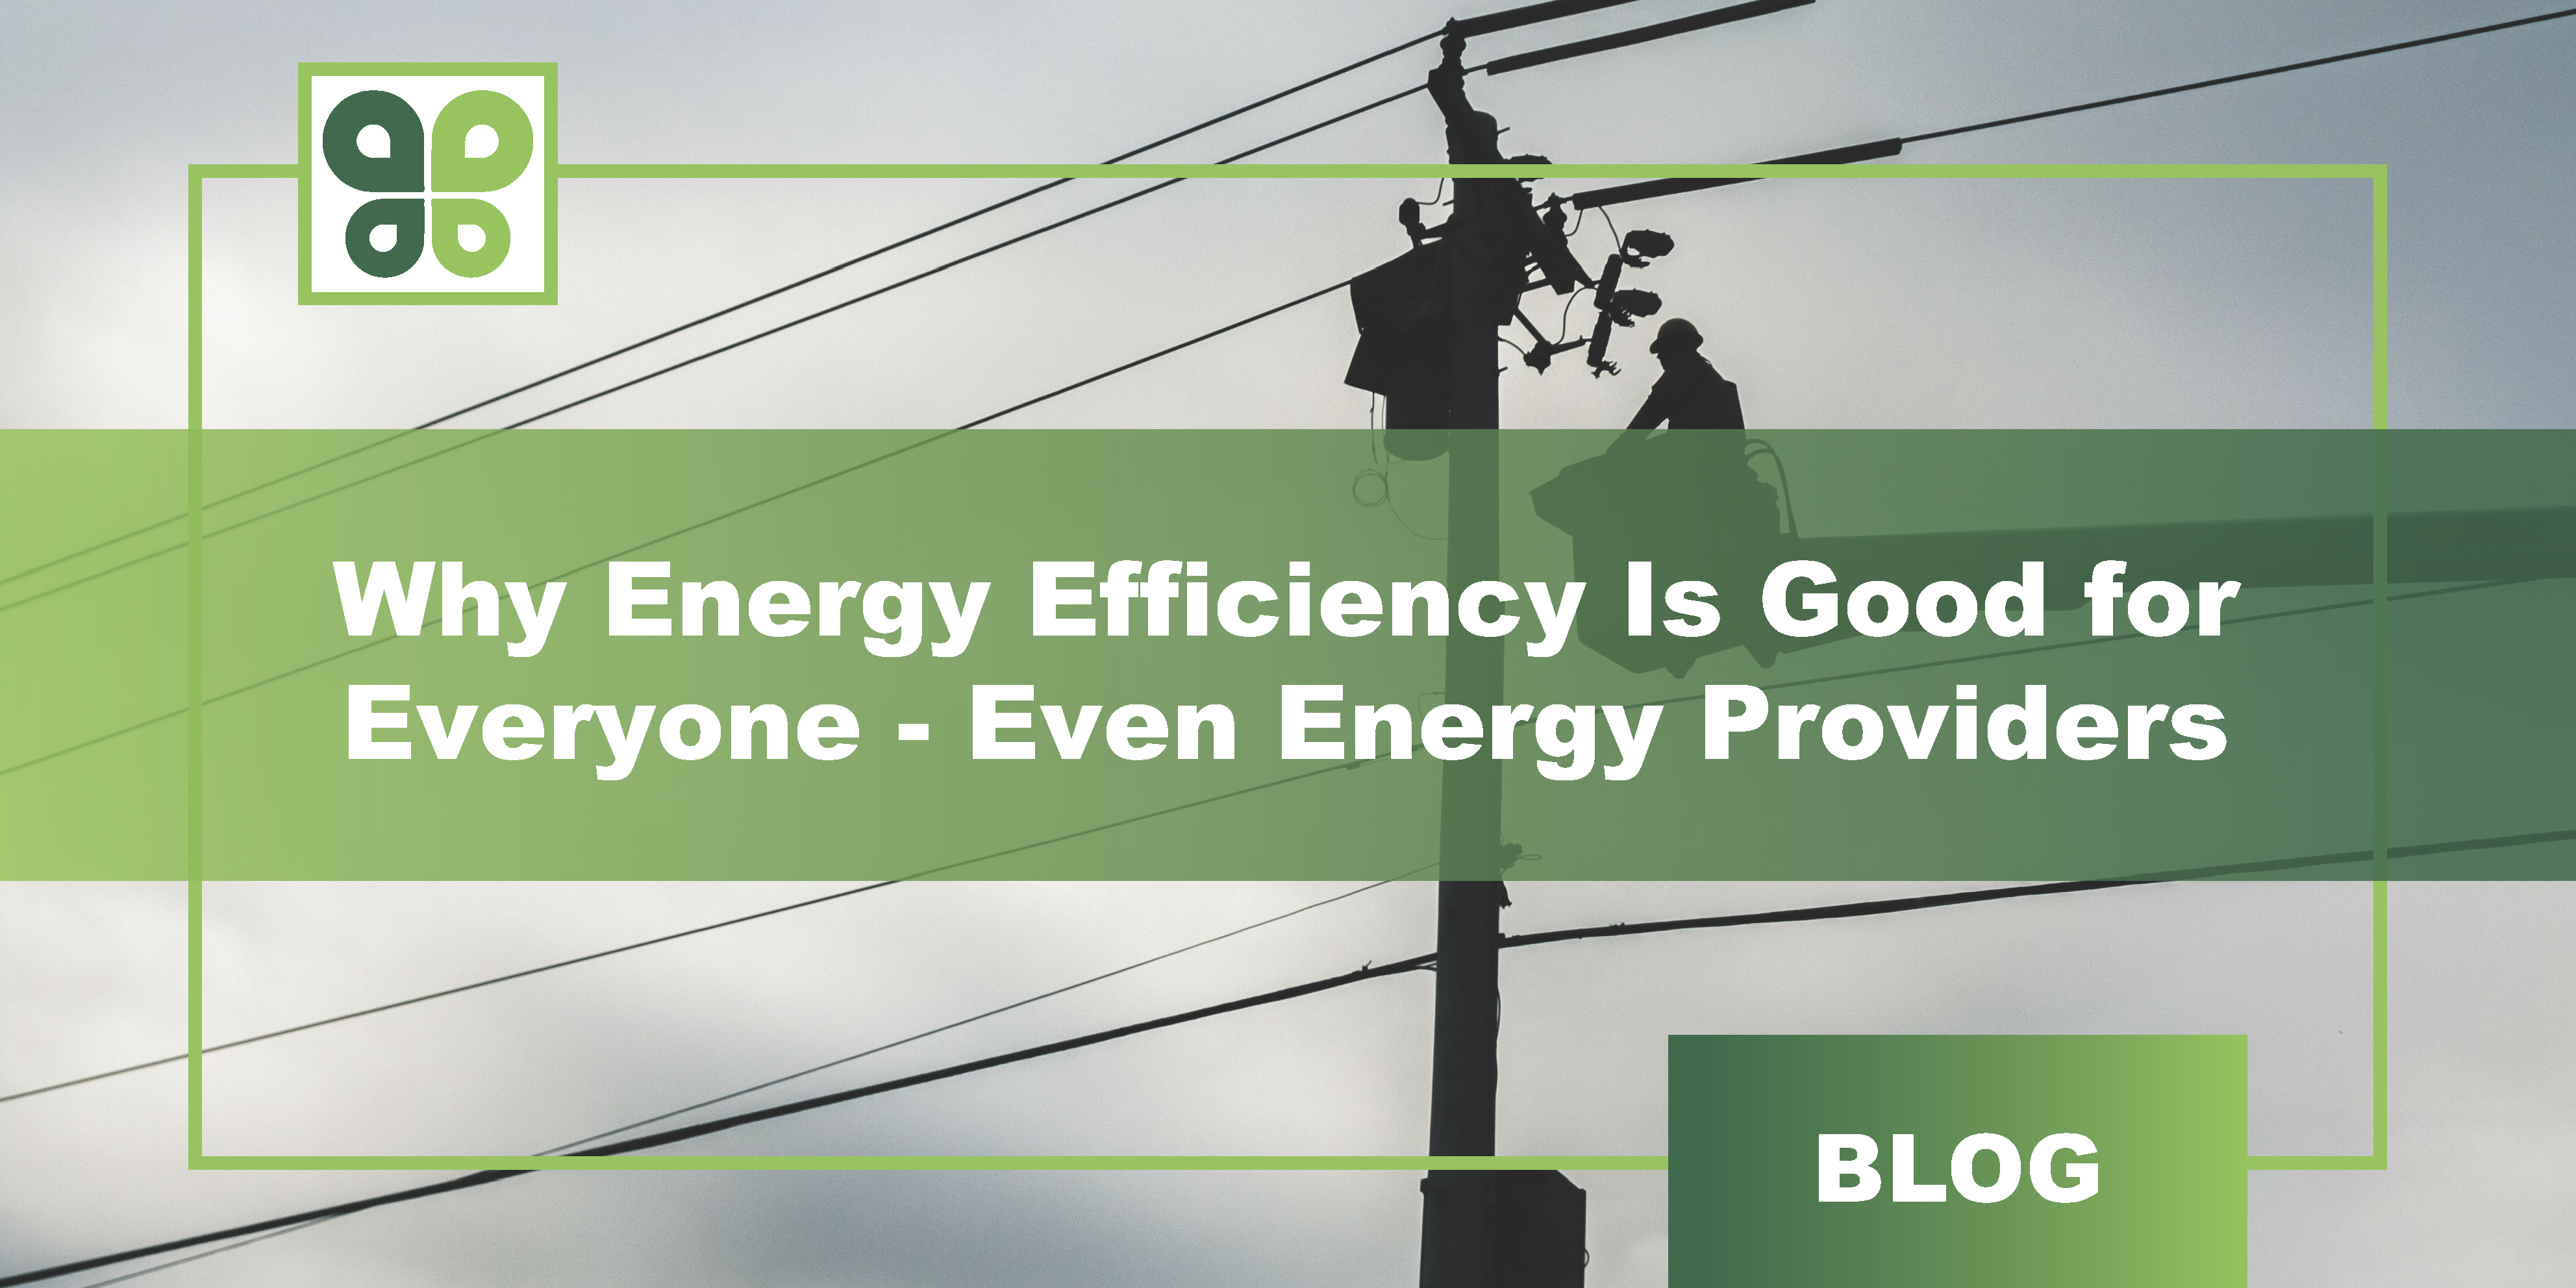 Why Energy Efficiency Is Good for Everyone—Even Energy Providers